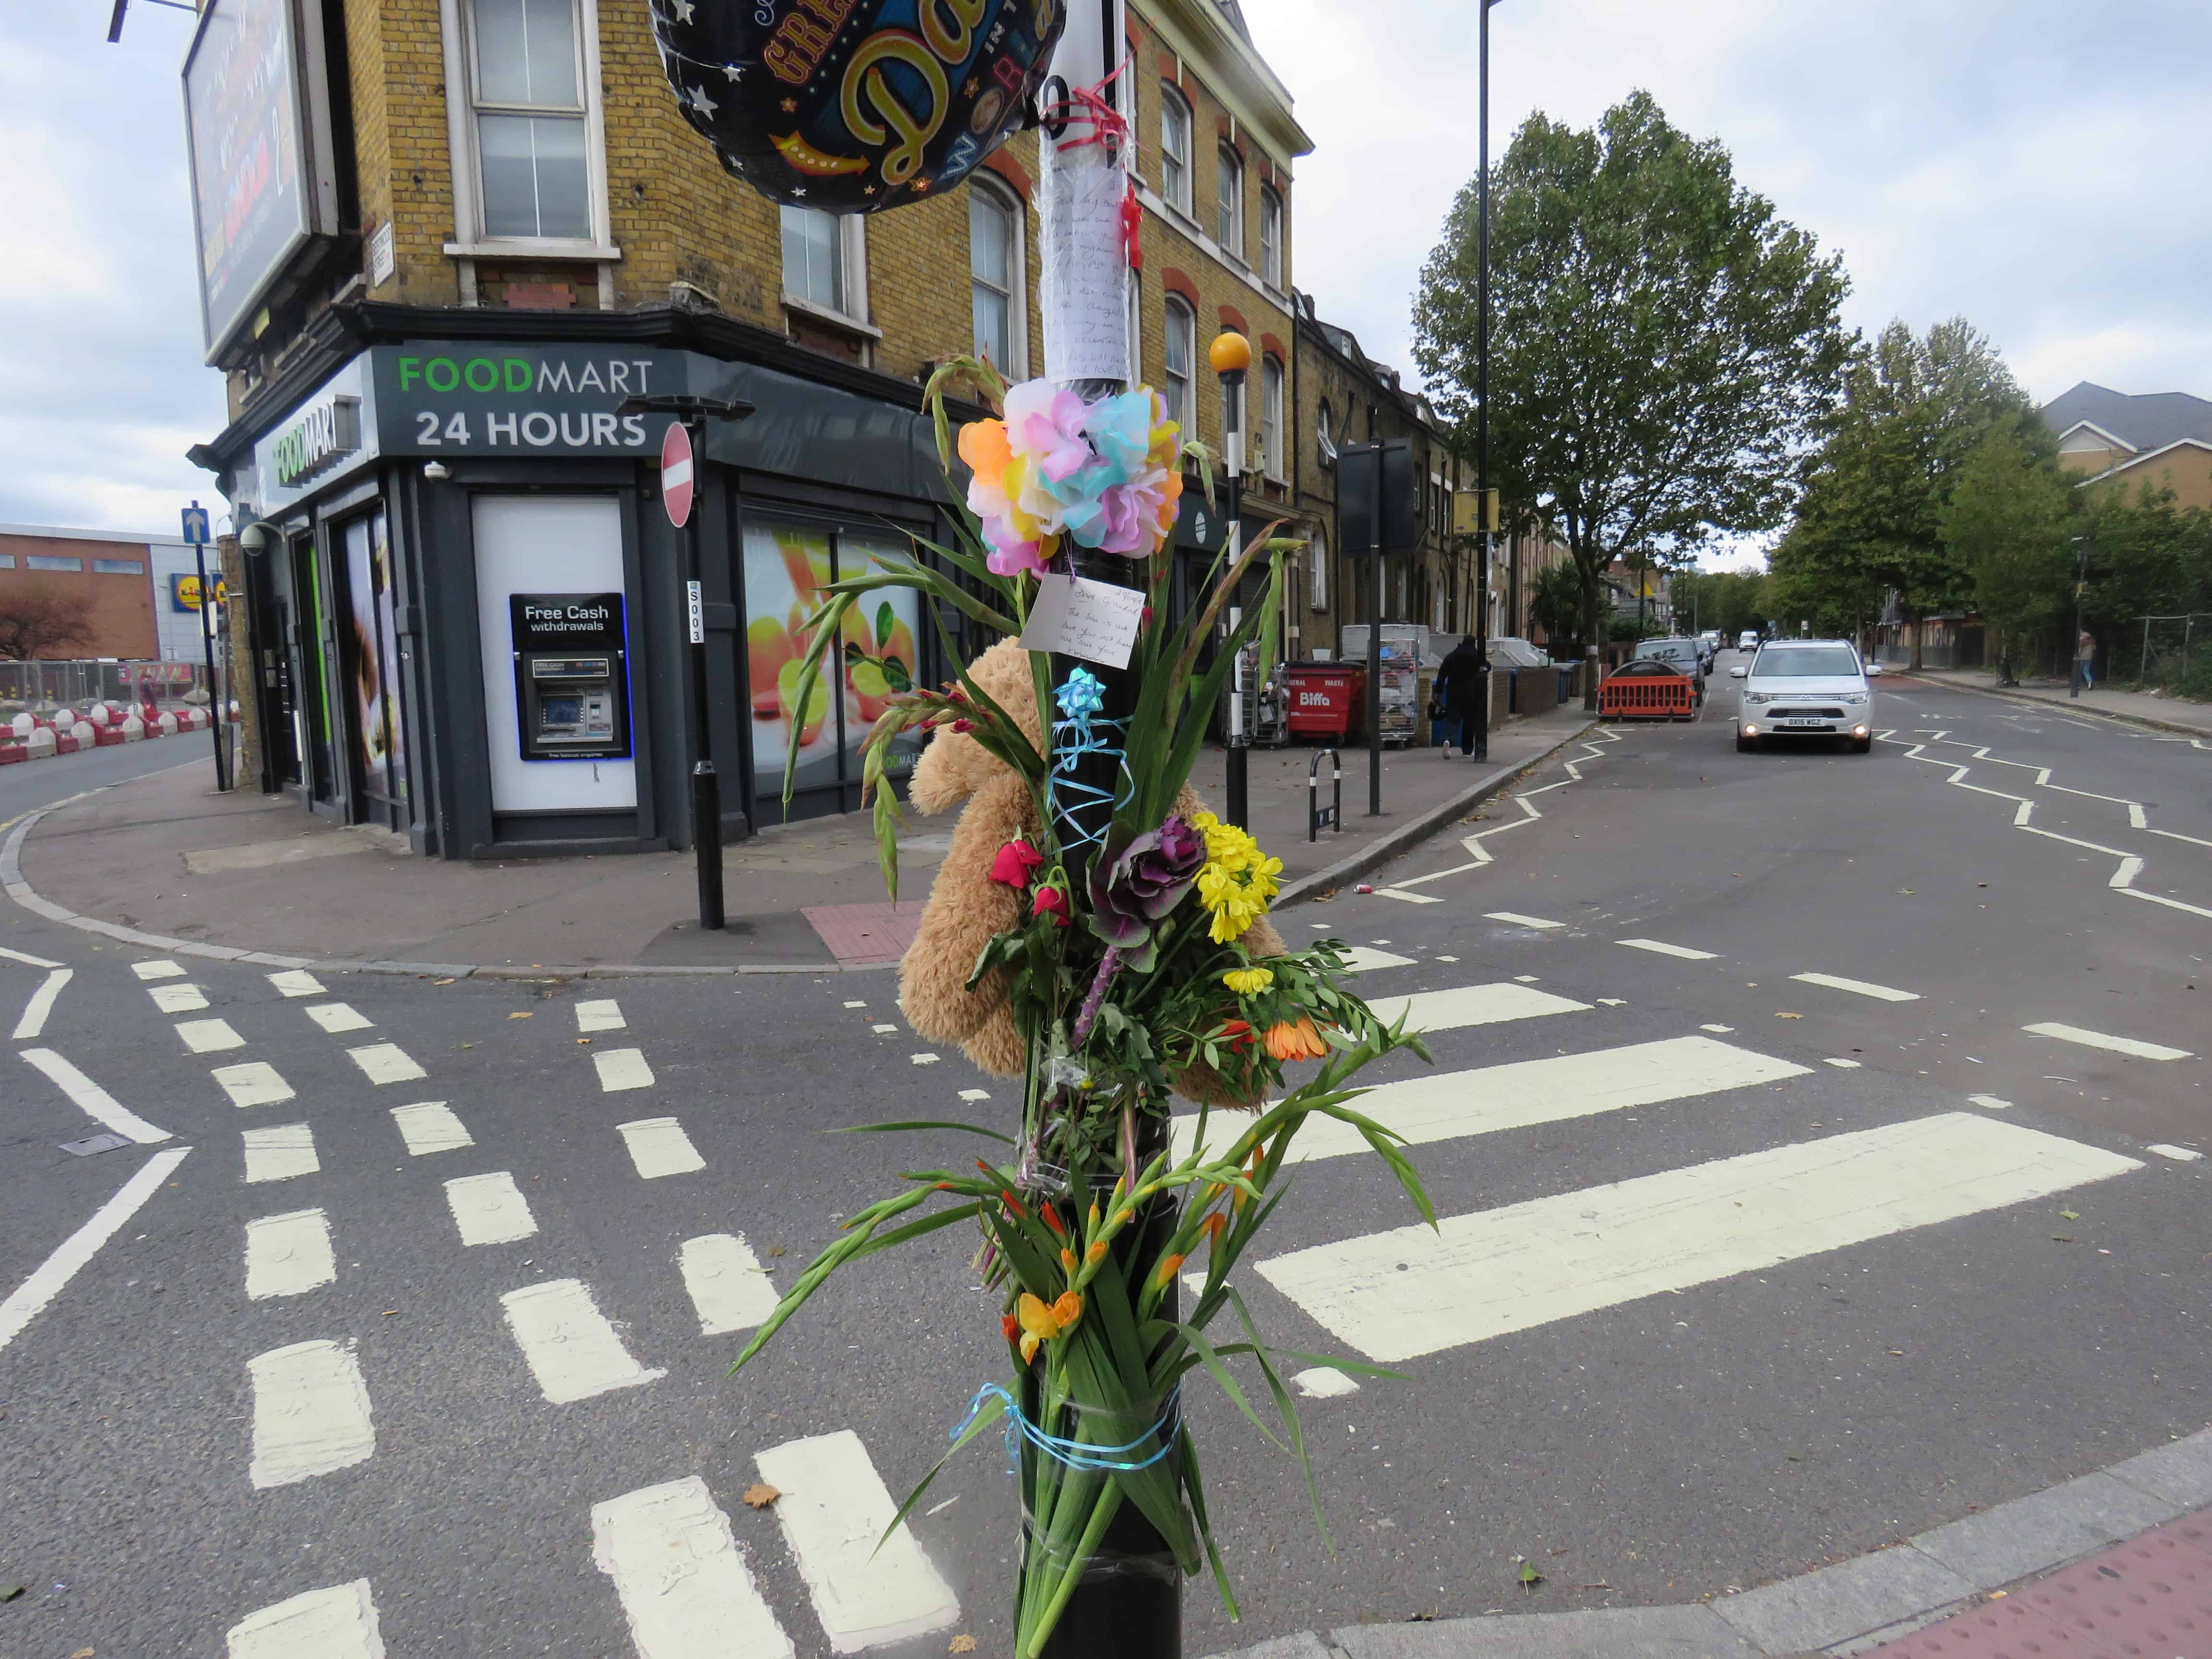 Flowers and notes of condolence have been left at the scene of the collision which claimed the cyclist's life